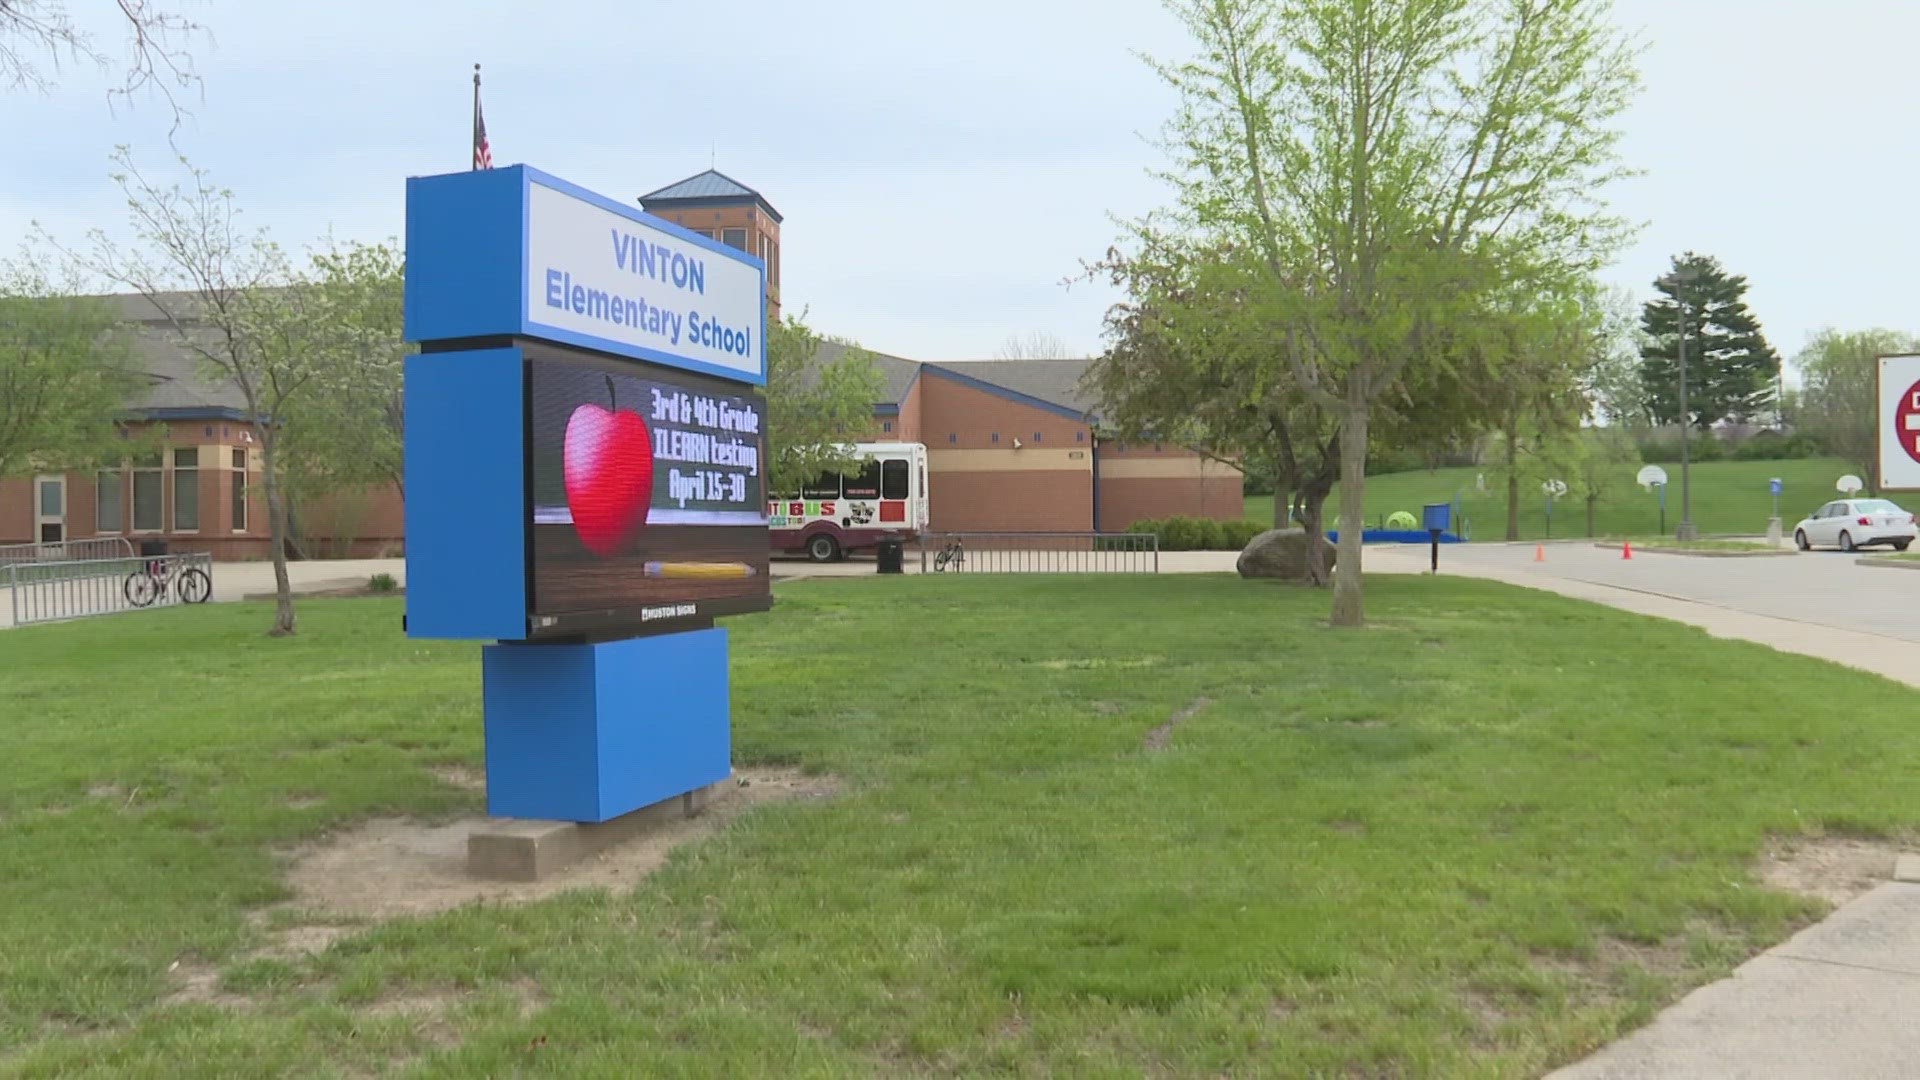 Earlier this week, we were first to tell you about a Lafayette Elementary School moving to a four-day week starting next year.